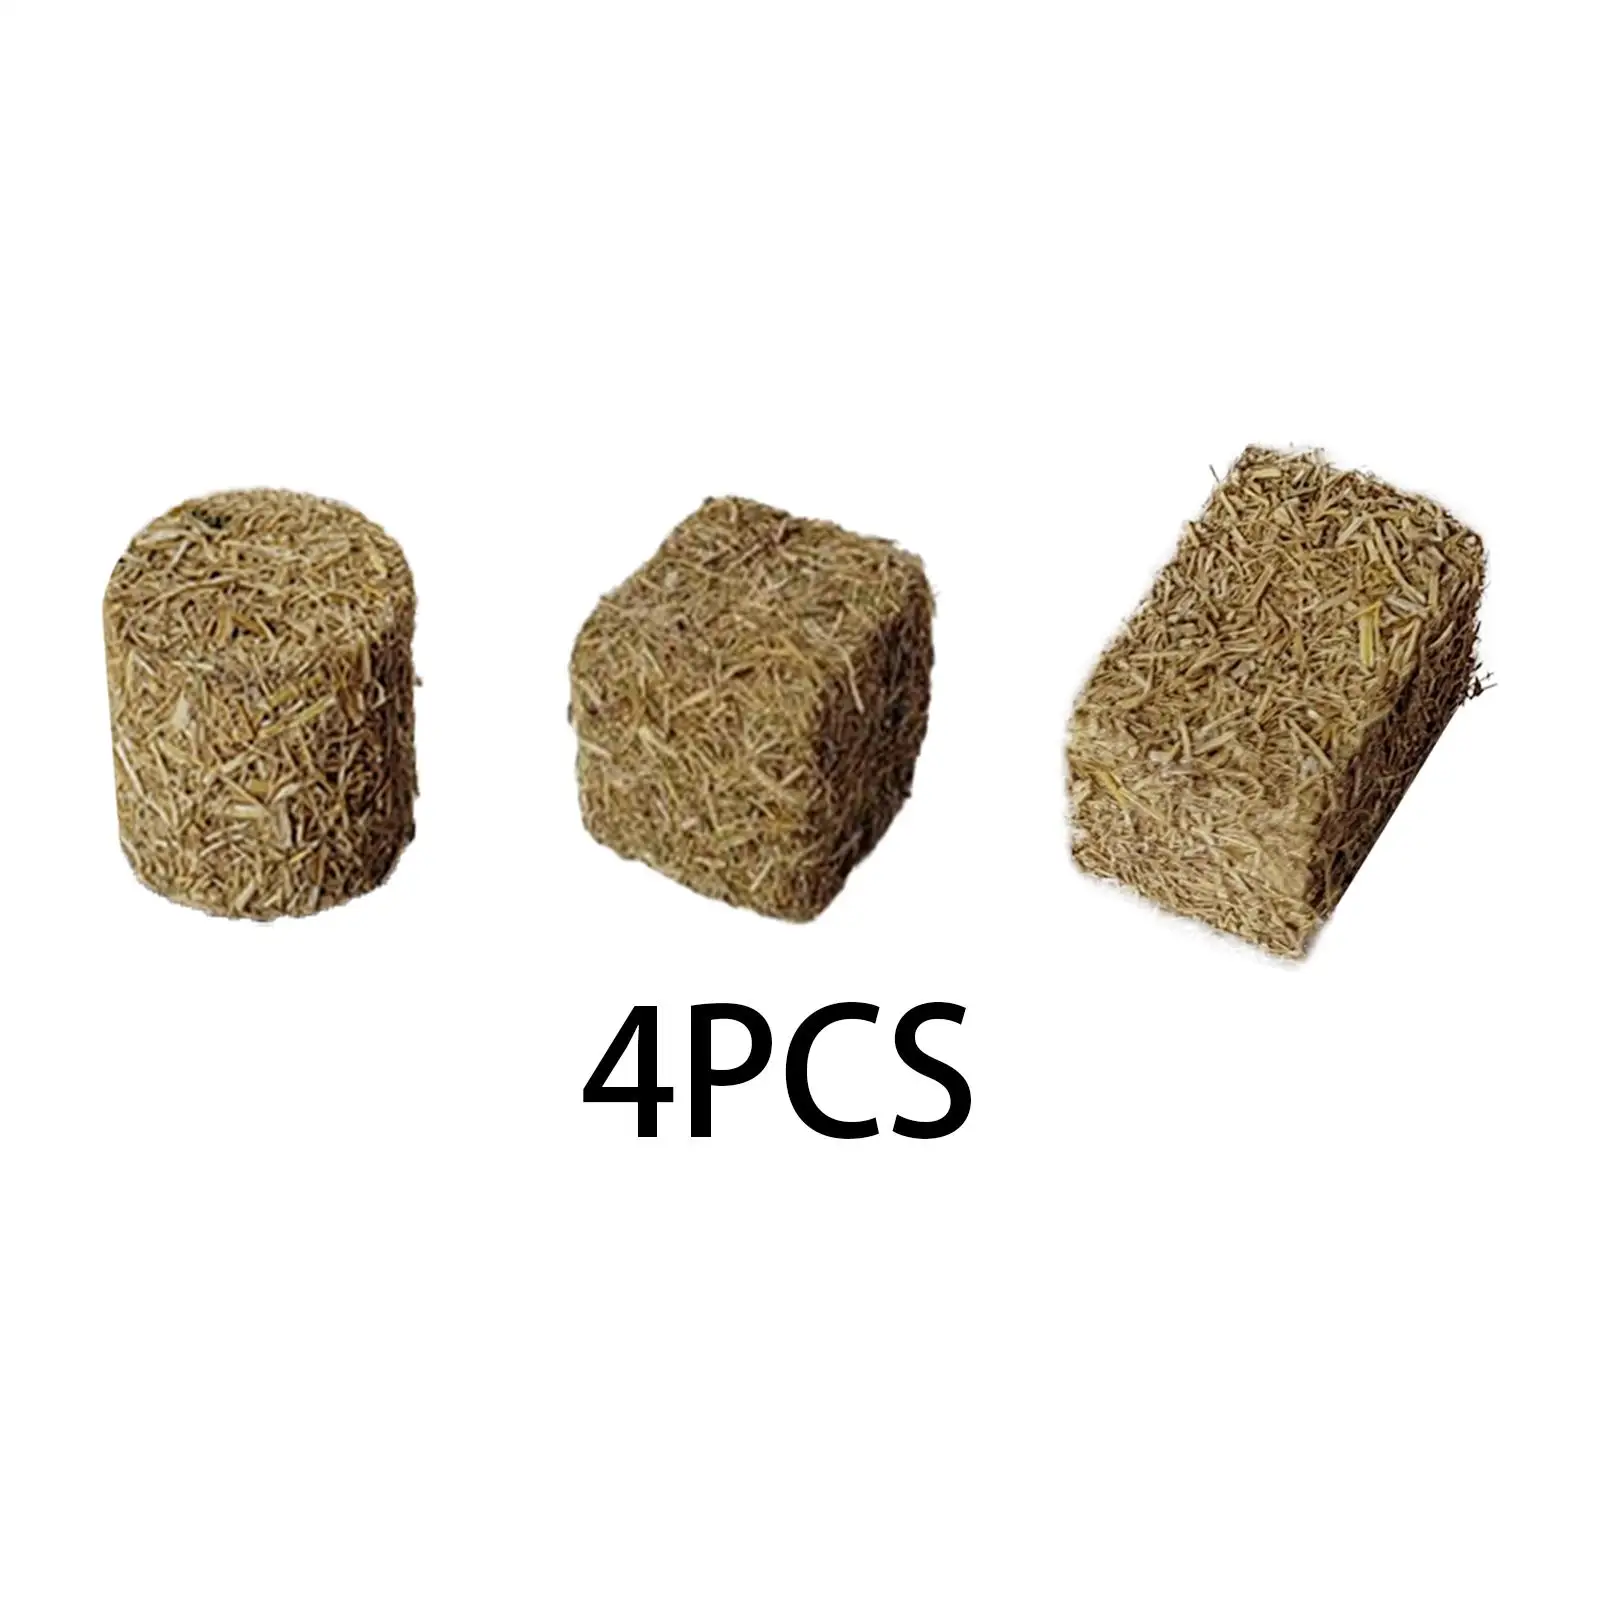 

4Pcs Mini Hay Bales Miniature Scenery Micro Landscape Simulated Haystack for Garden Home Dollhouse DIY Crafts Decoration